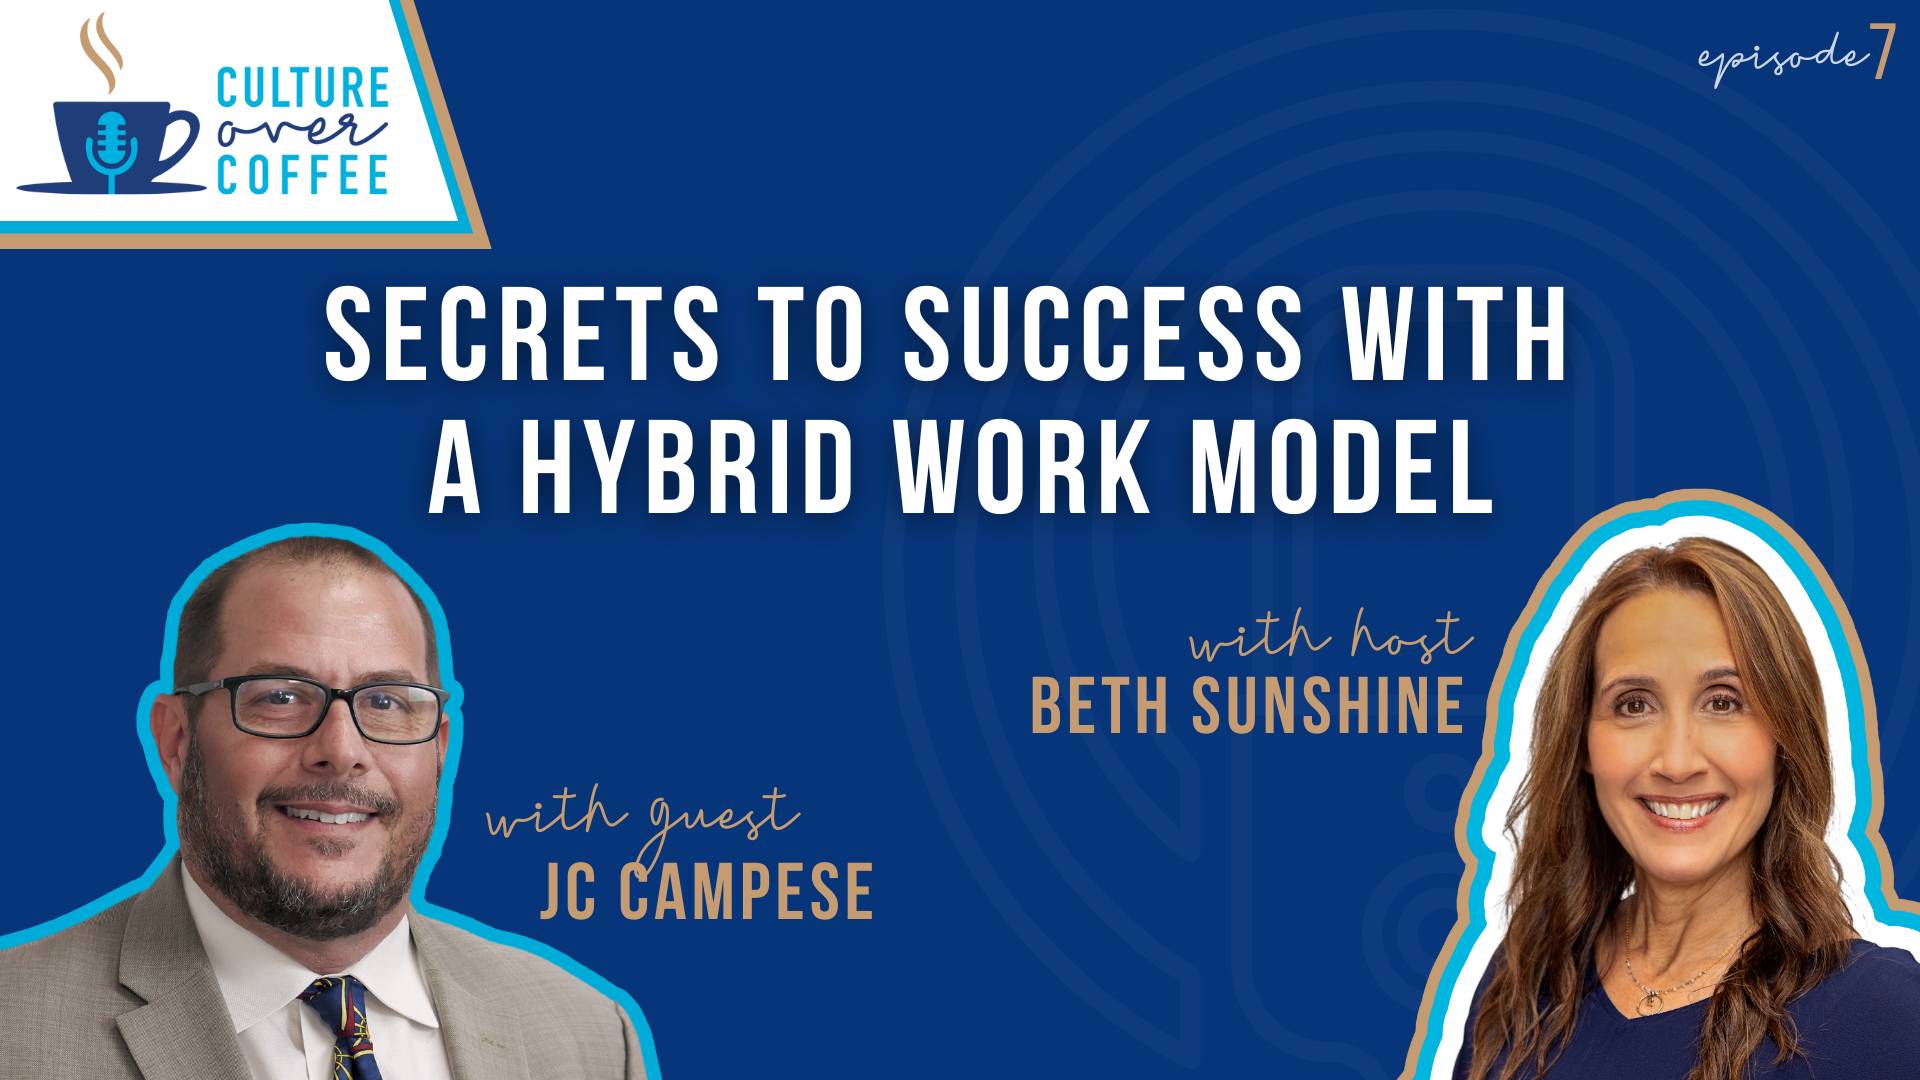 Culture Over Coffee Podcast: Secrets to Success with a Hybrid Work Model with JC Campese